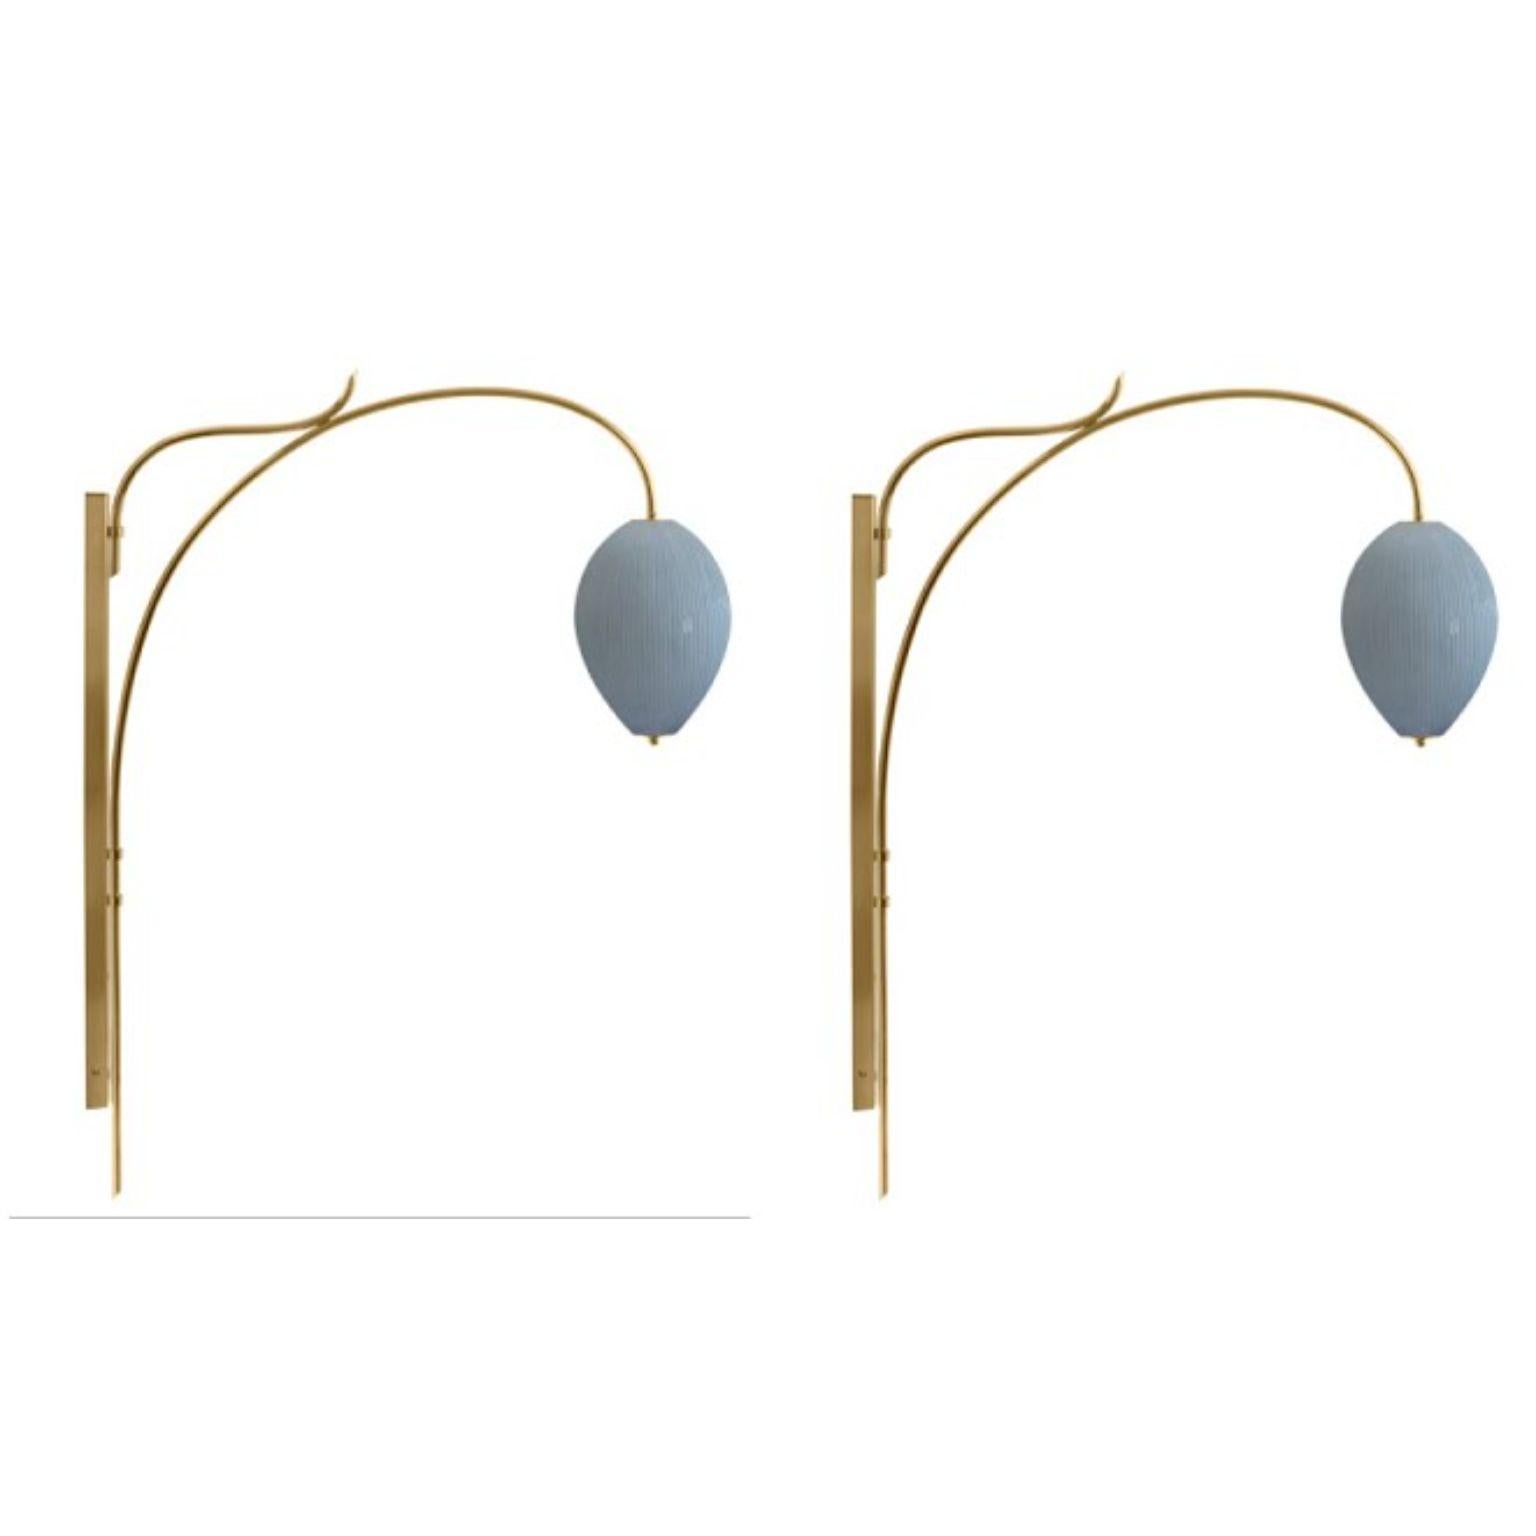 Wall lamp China 10 by Magic Circus Editions
Dimensions: H 134 x W 25.2 x D 113.5 cm
Materials: Brass, mouth blown glass sculpted with a diamond saw
Colour: opal grey

Available finishes: Brass, nickel
Available colours: enamel soft white, soft rose,